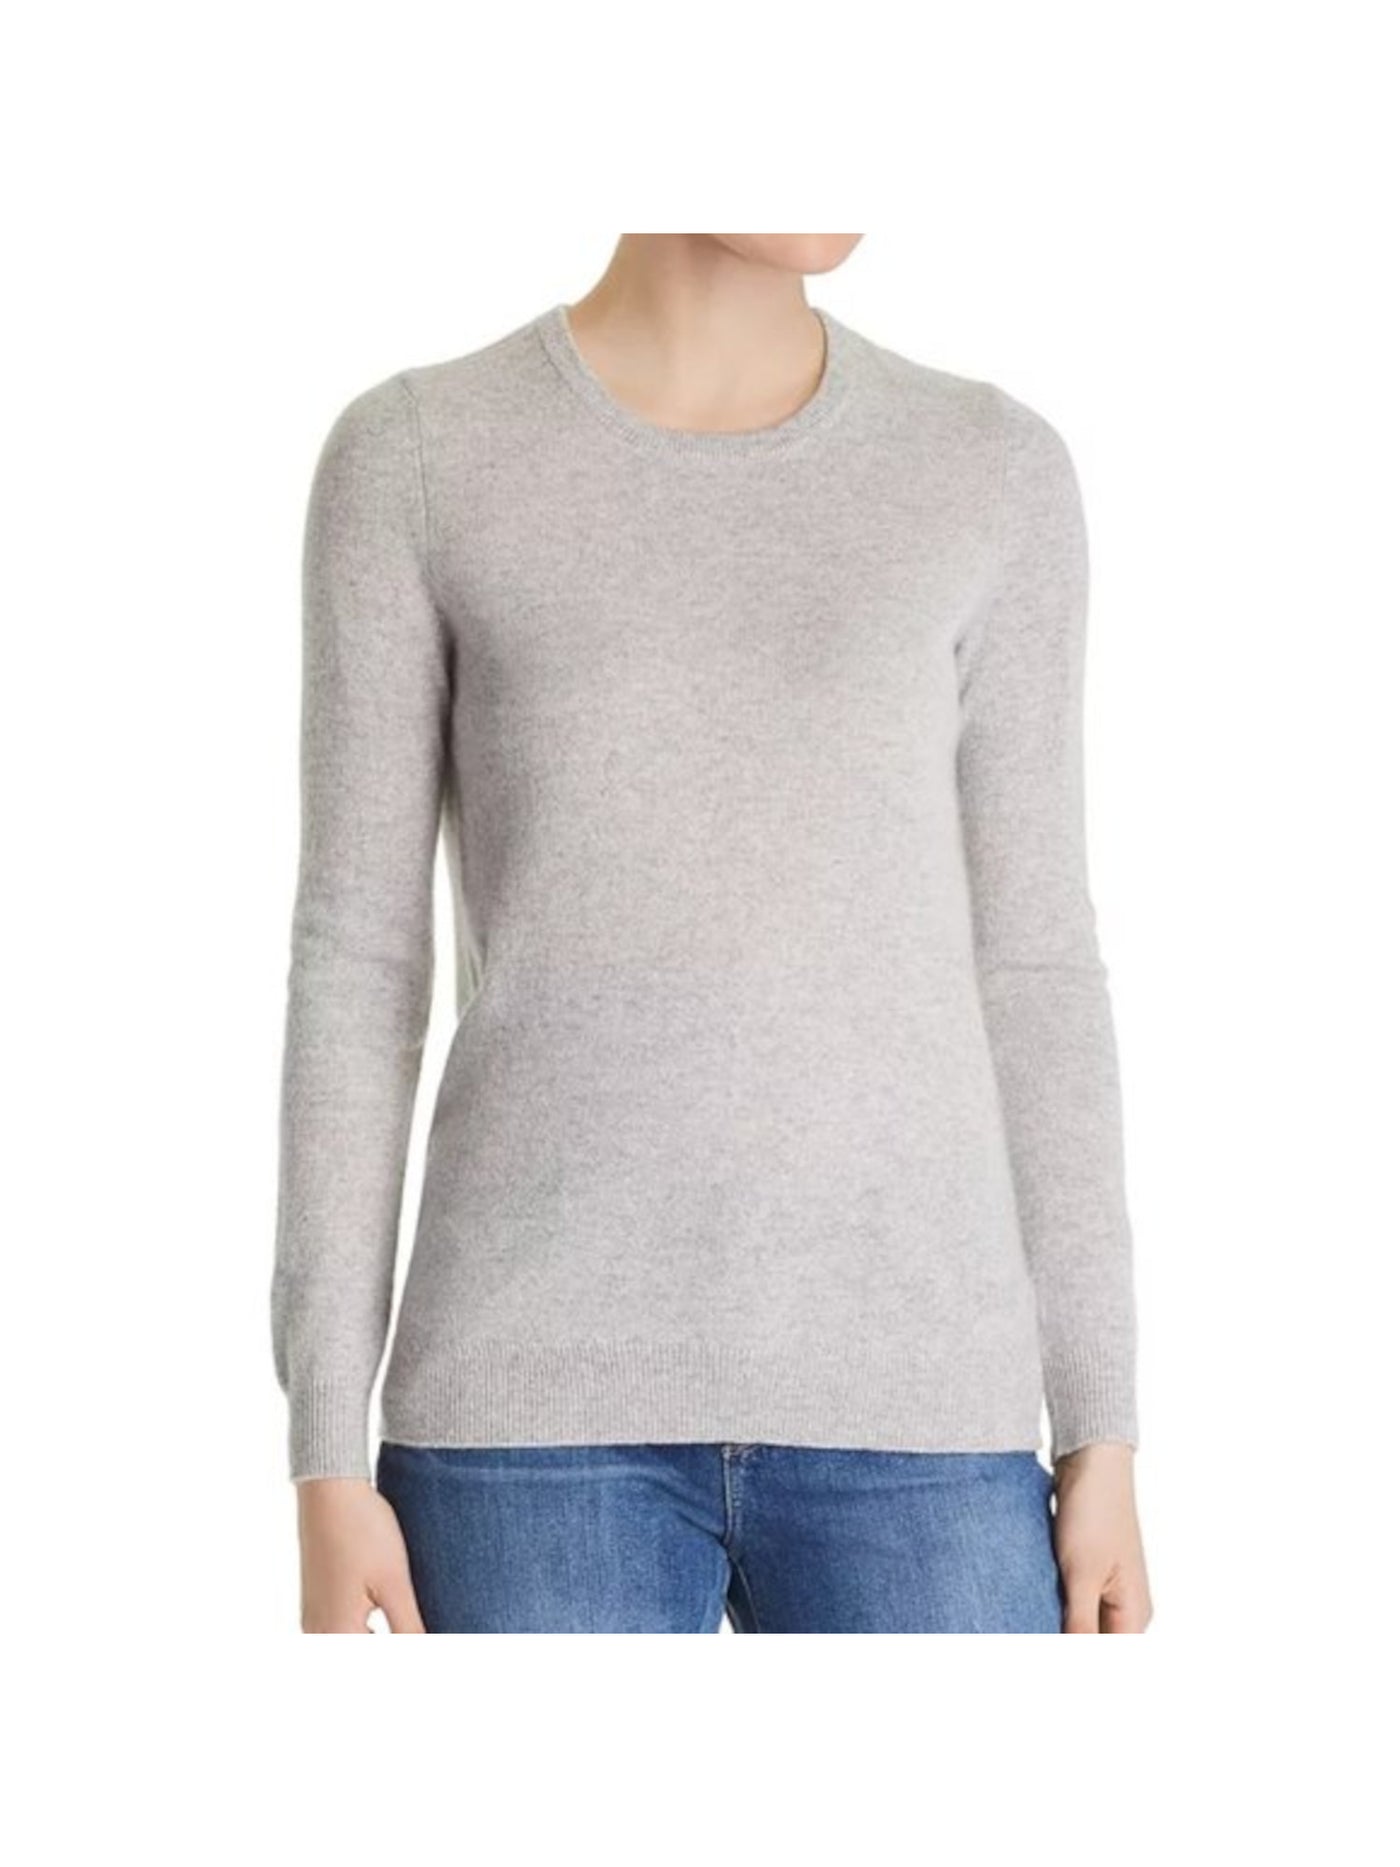 C Womens Gray Cashmere Long Sleeve Crew Neck Wear To Work Sweater XS